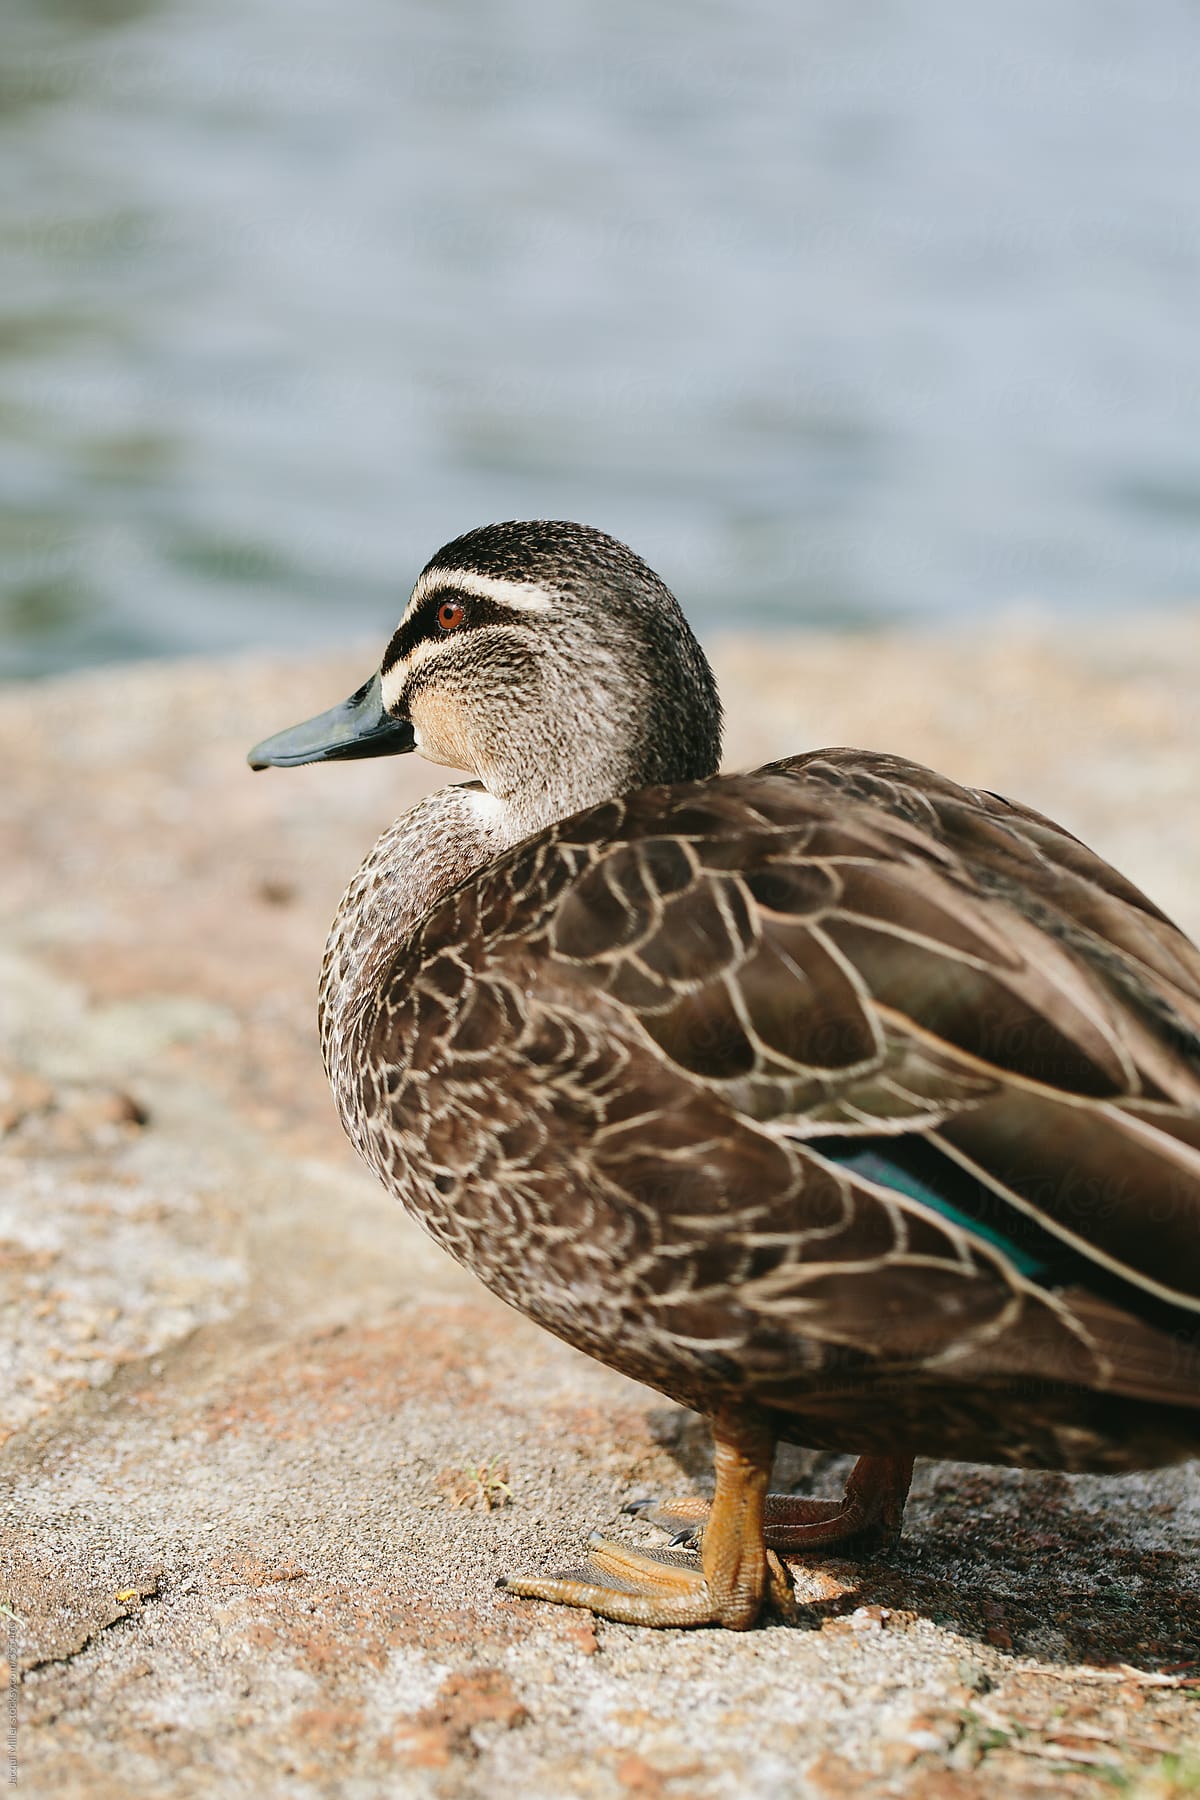 Pacific black duck (Anas superciliosa) standing near water